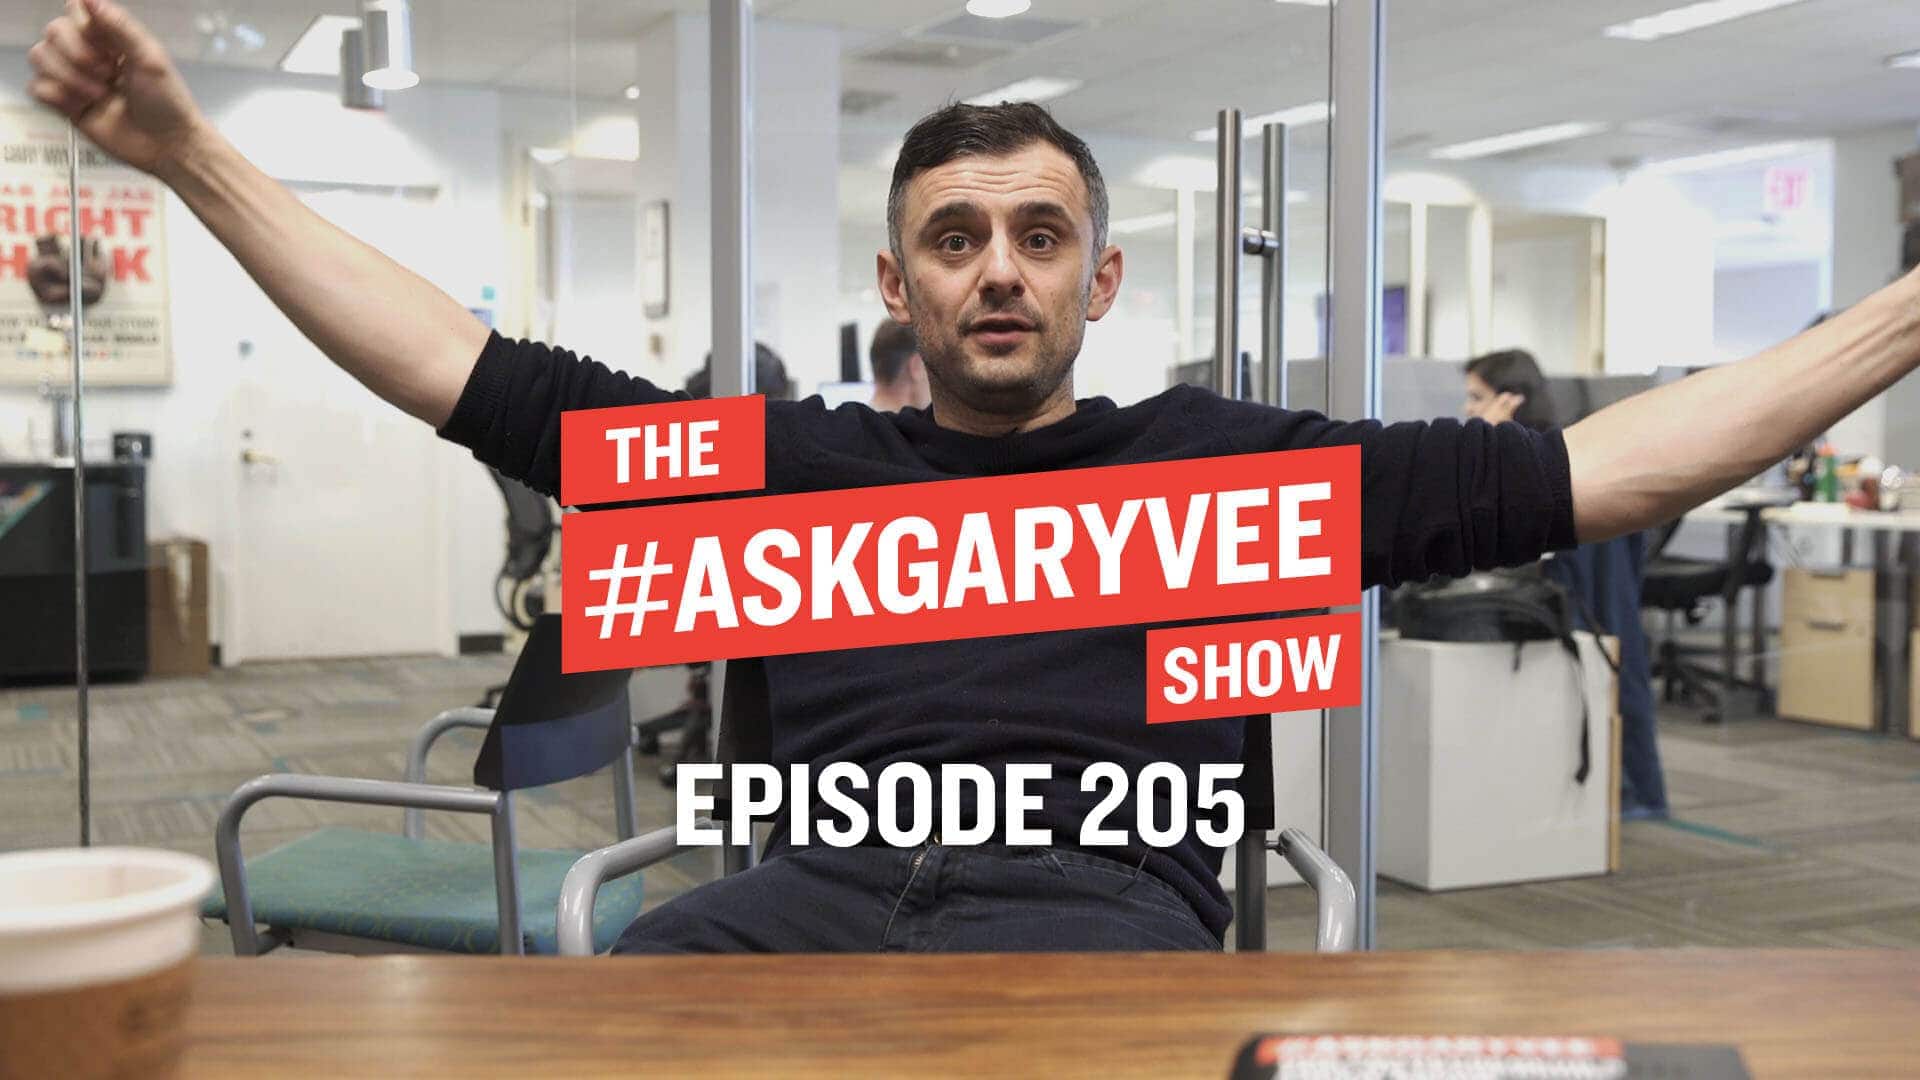 Negotiation Strategies, Logo Changes & the Apparel Business | #AskGaryVee Episode 205